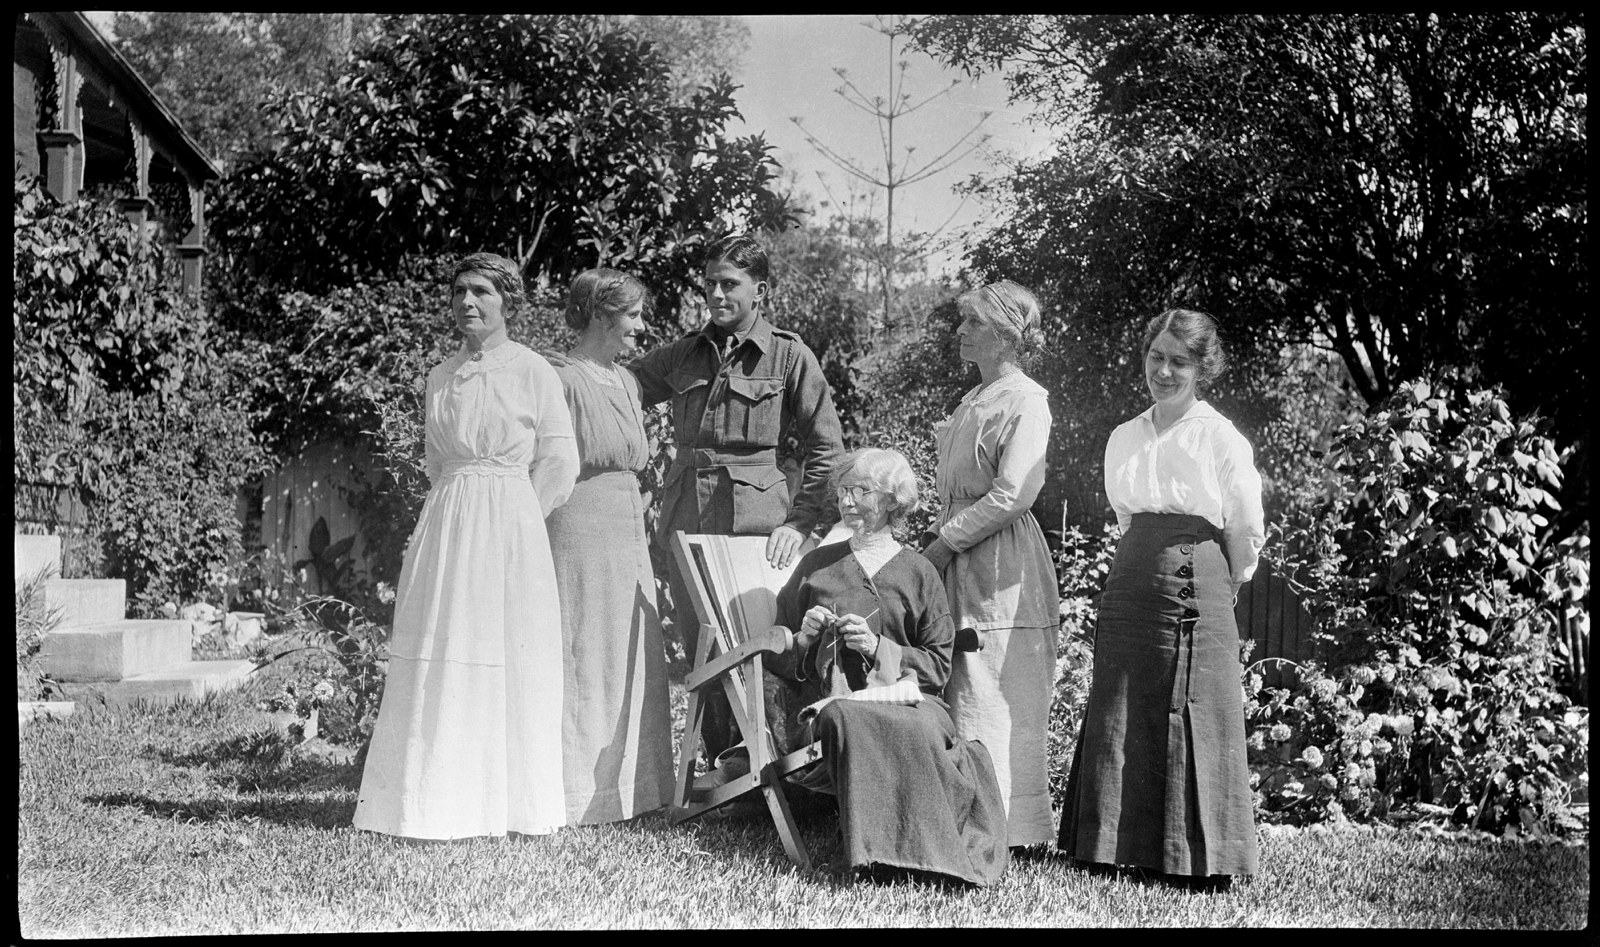 The Thorburn sisters and their niece Elgin Macgregor with Robert Barnet, photograph taken by Robert Barnet, March 1916